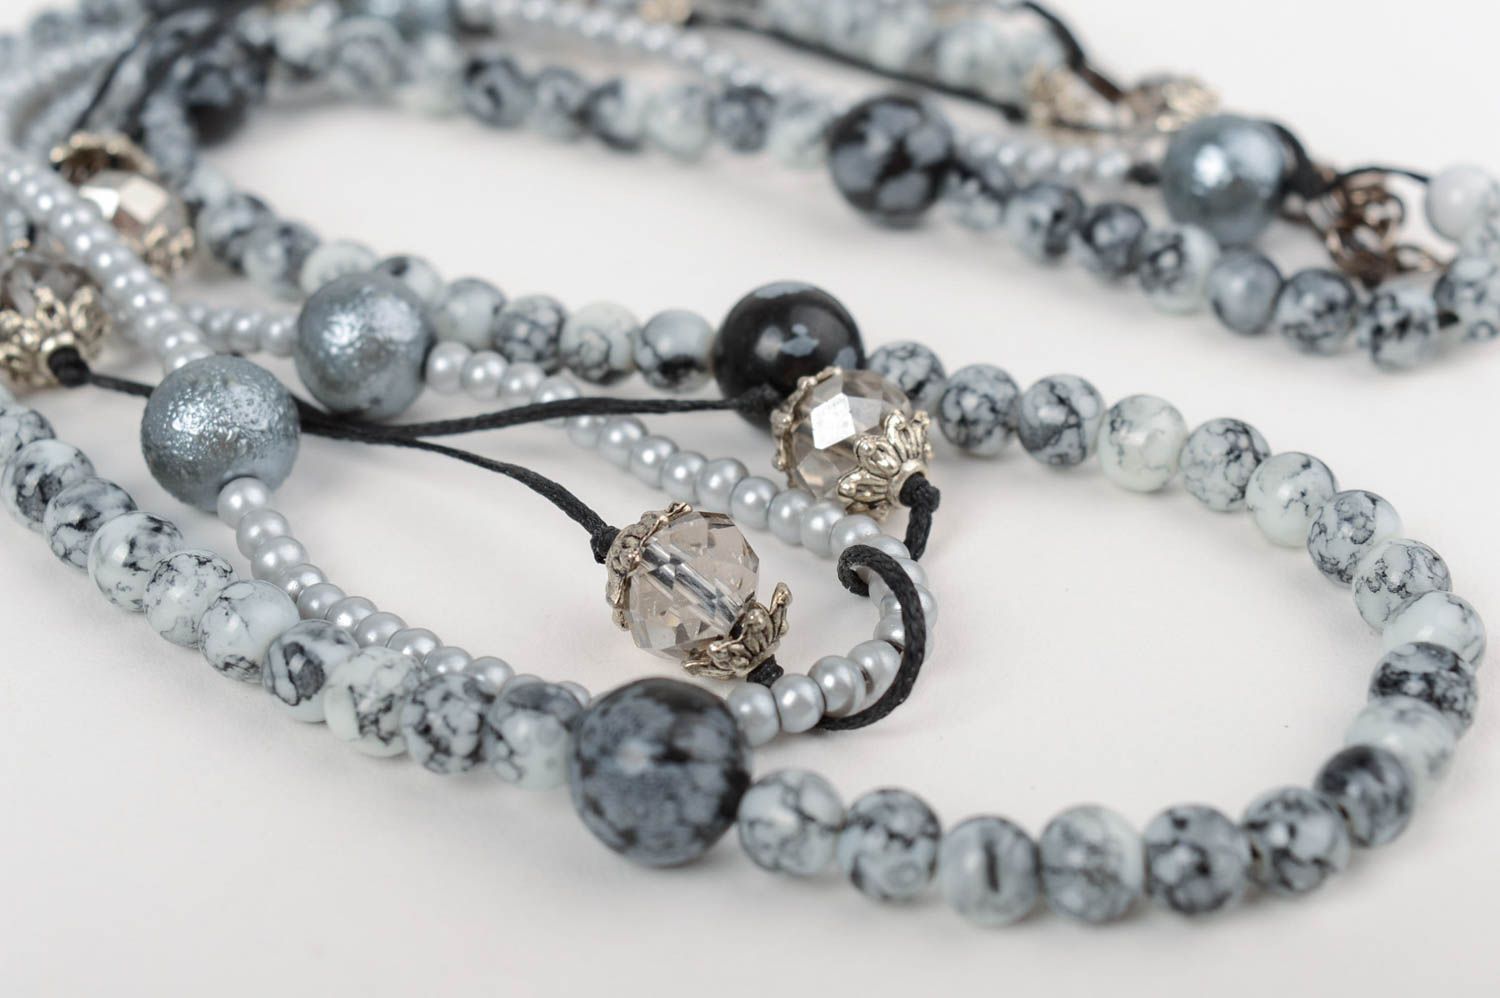 Czech crystal necklace with ceramic pearls on long cord handmade accessory photo 3